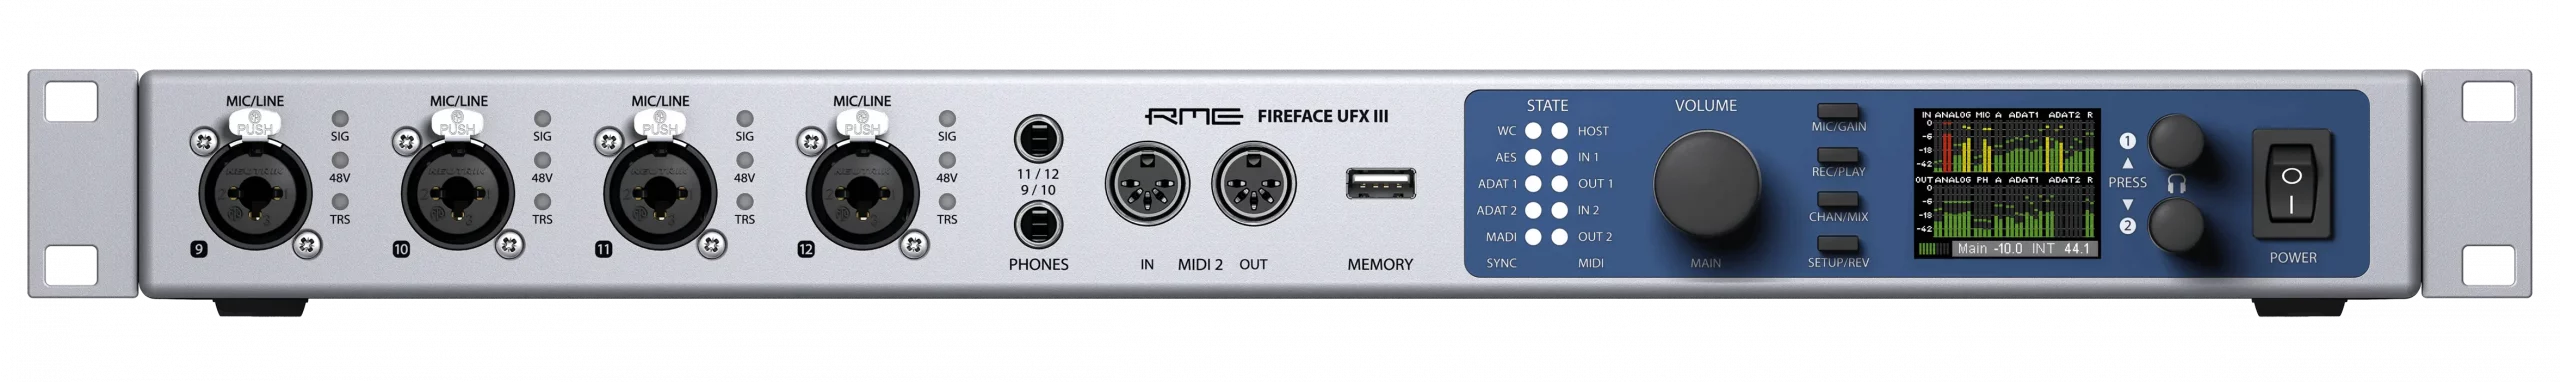 RME Fireface UFX III front panel